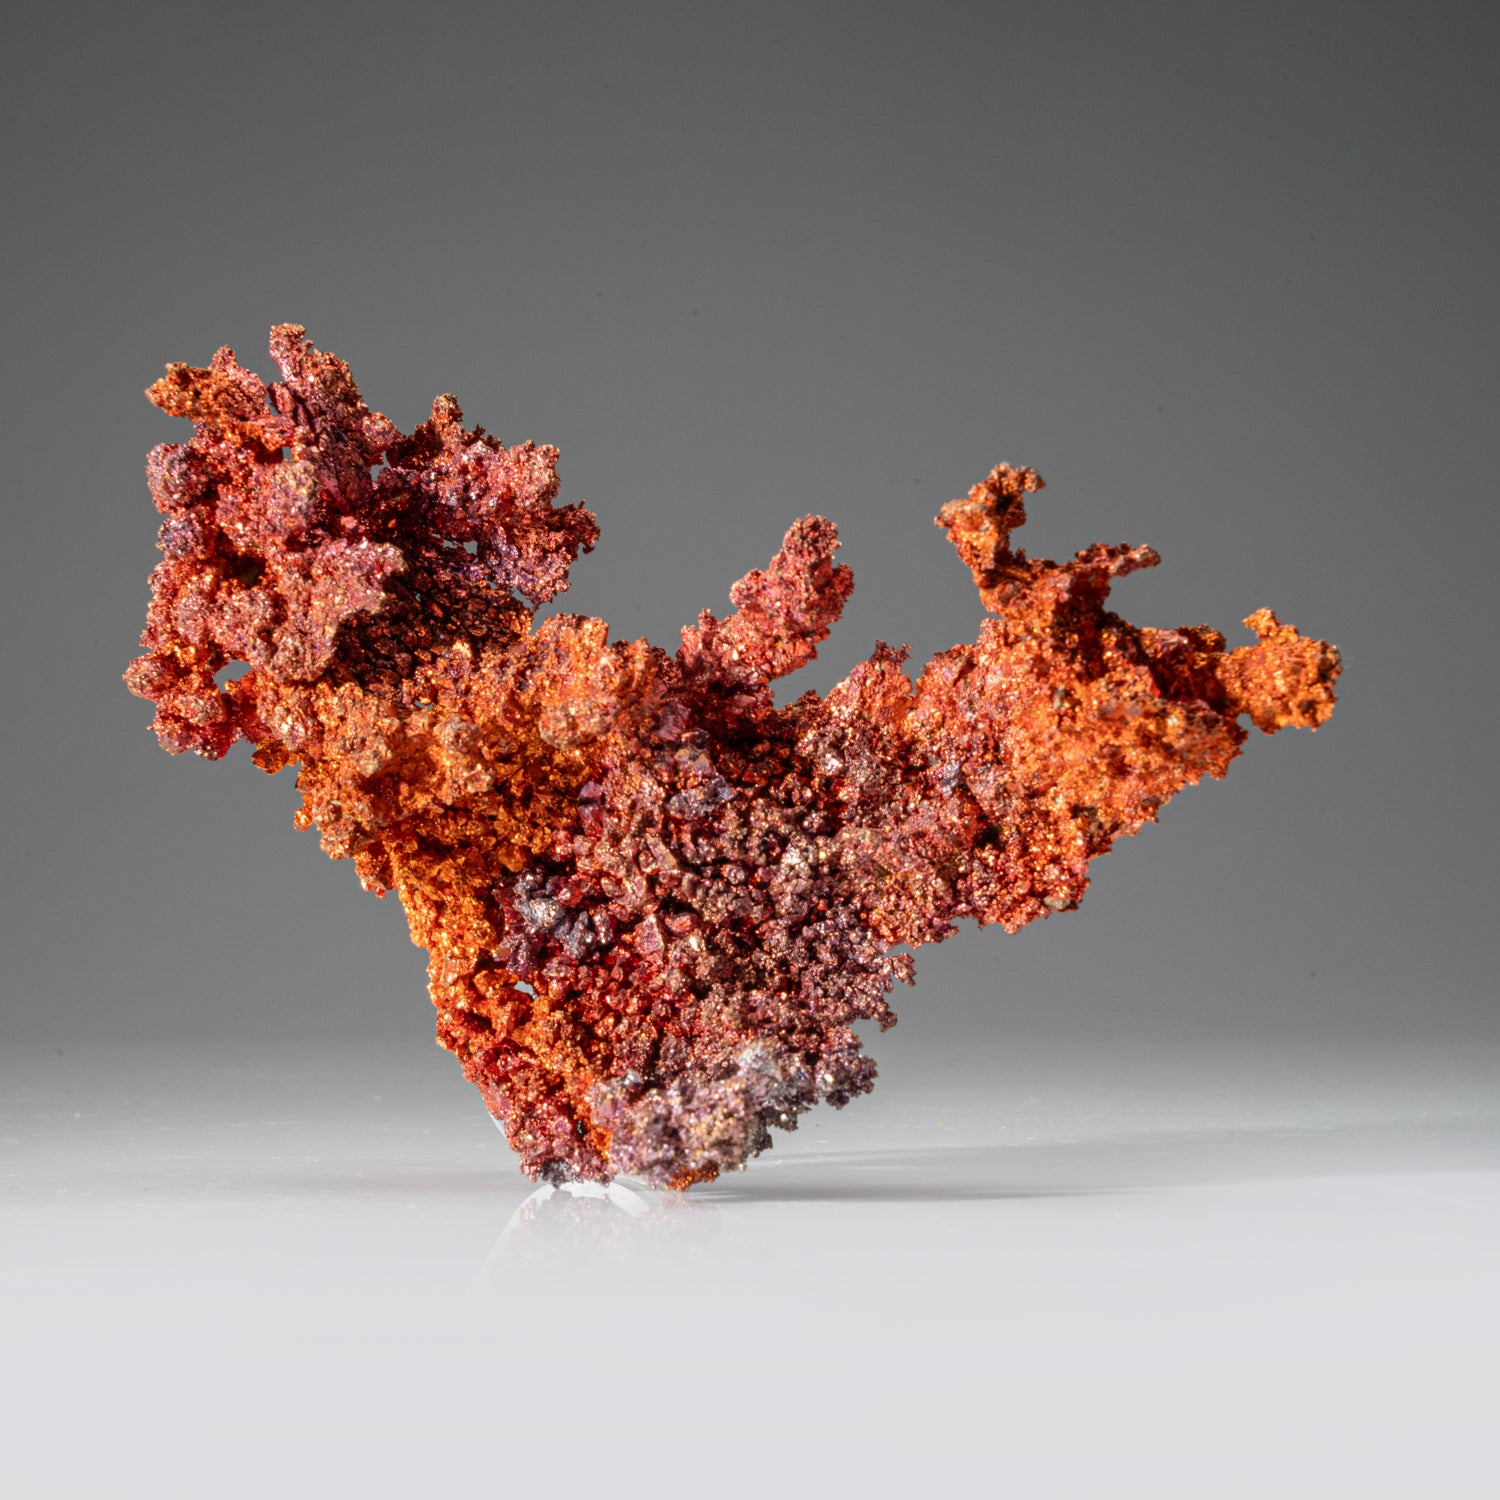 Copper Crystal Cluster from Chengmenshan Mine, Jiangxi Province, China